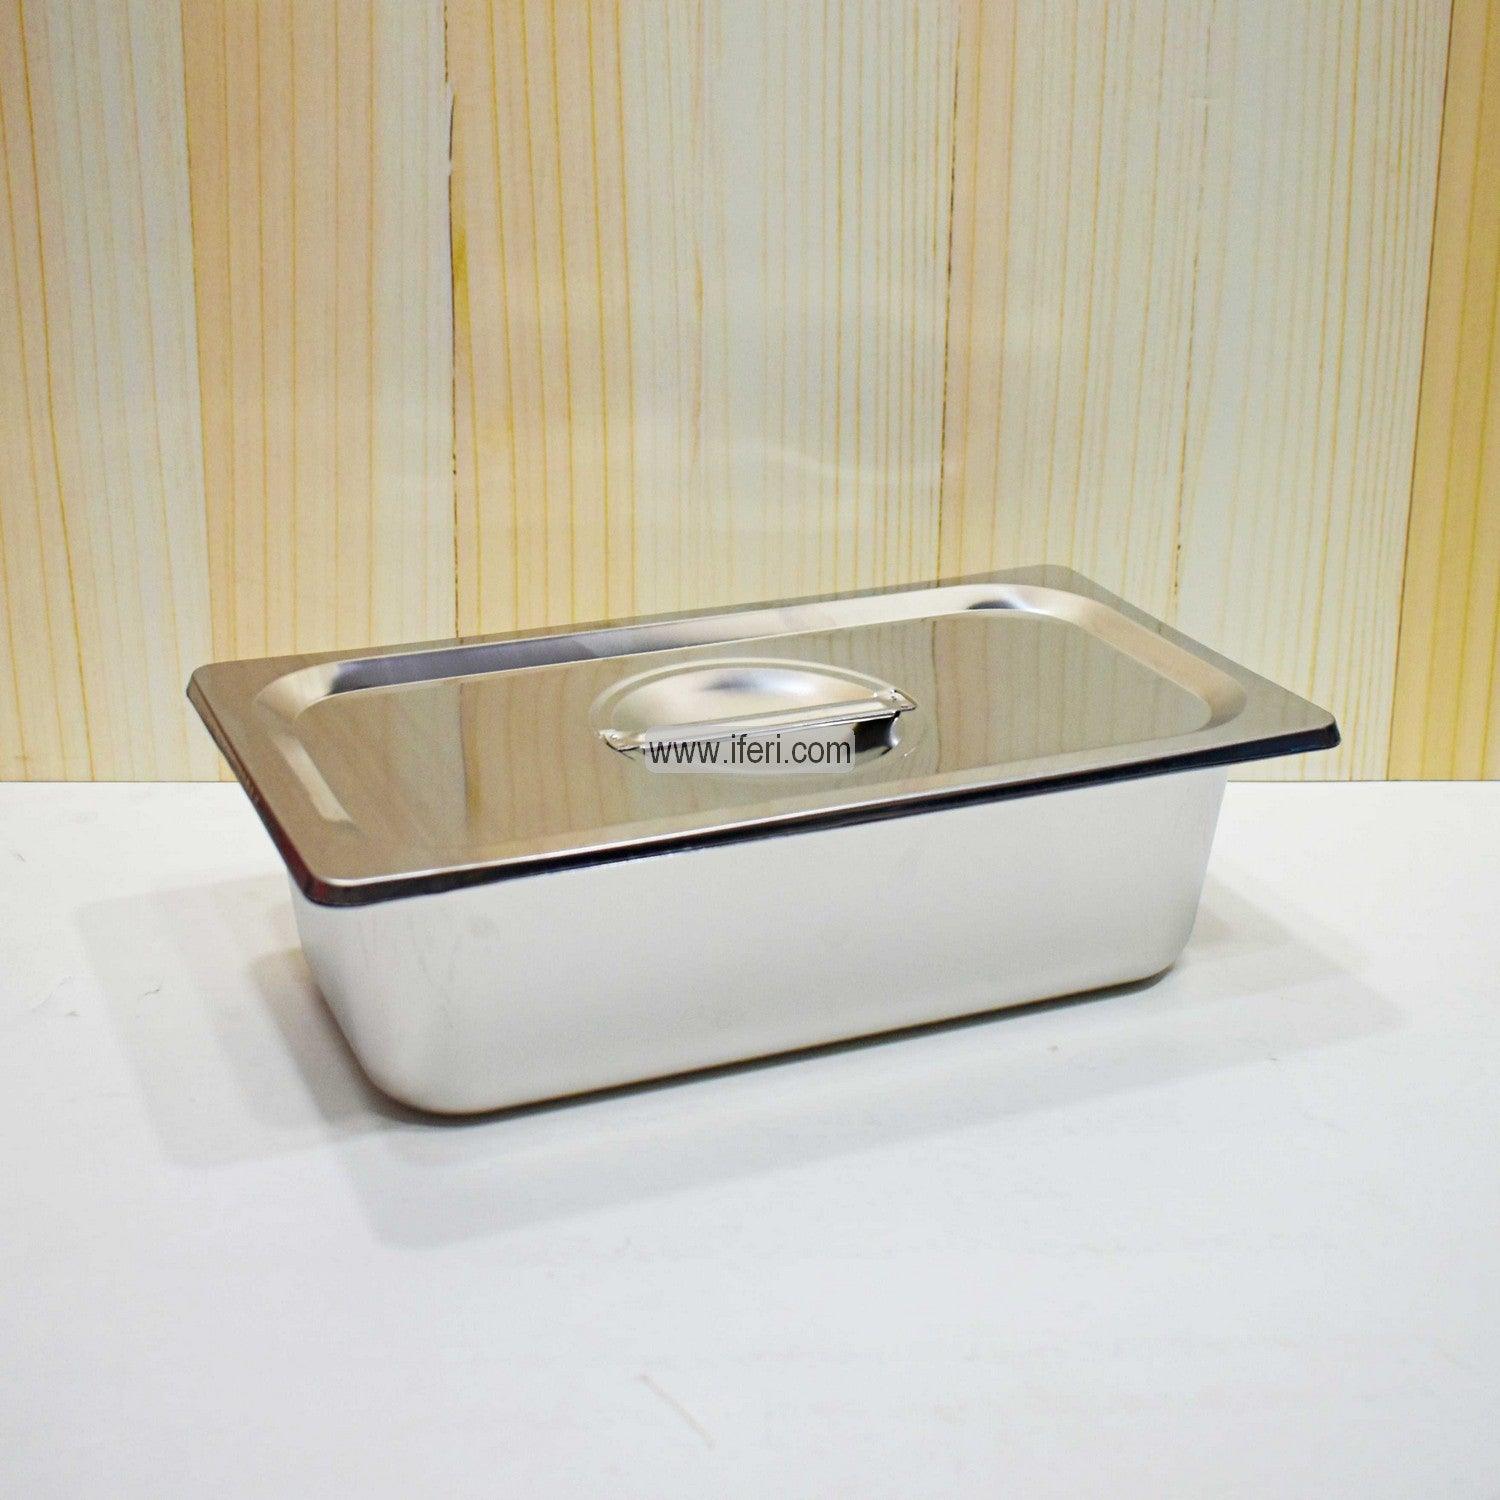 12.8 Inch Stainless Steel Food Pan with Lid SN0581 Price in Bangladesh - iferi.com